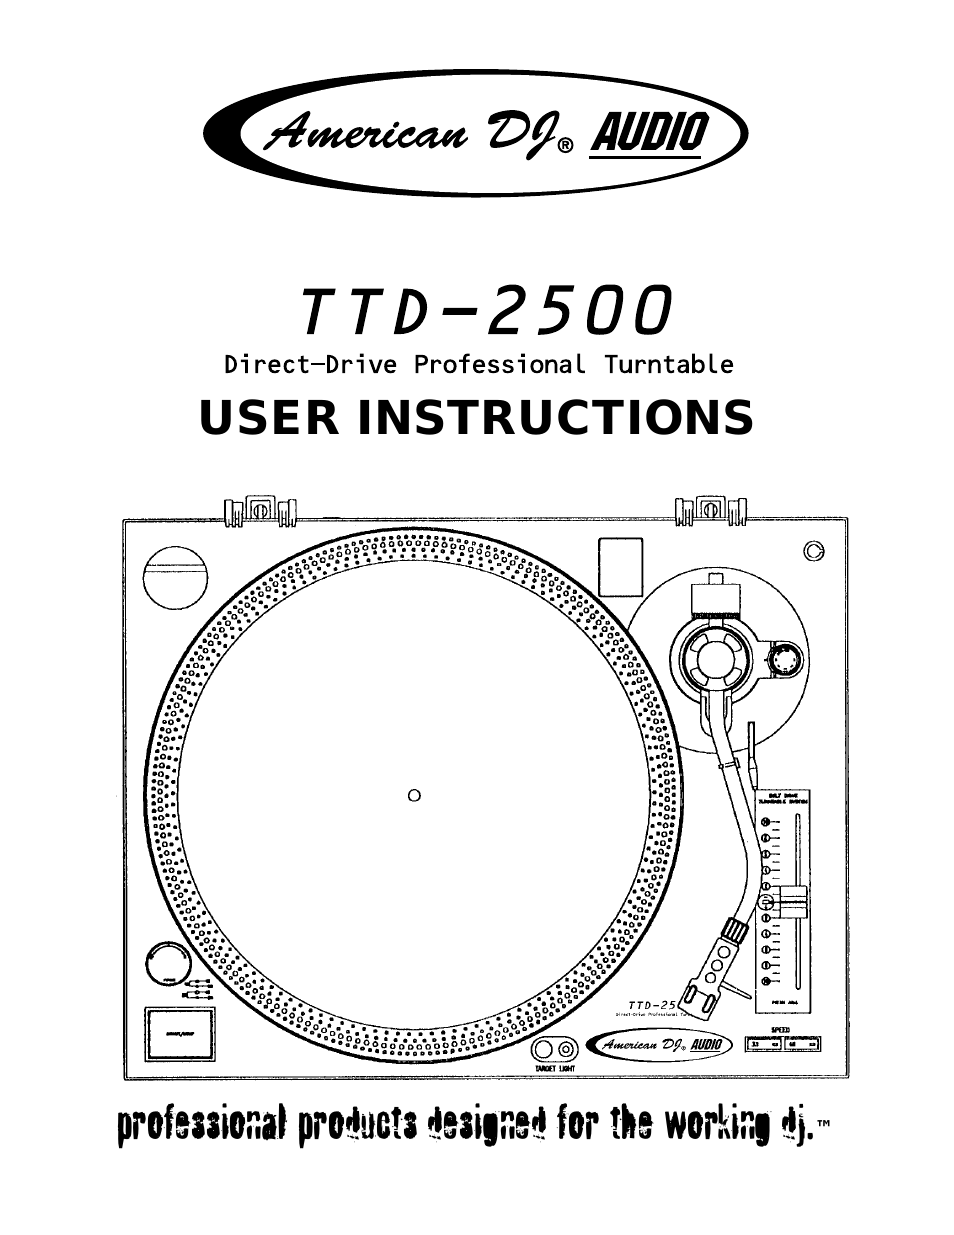 TTD-2500 (Page 1)